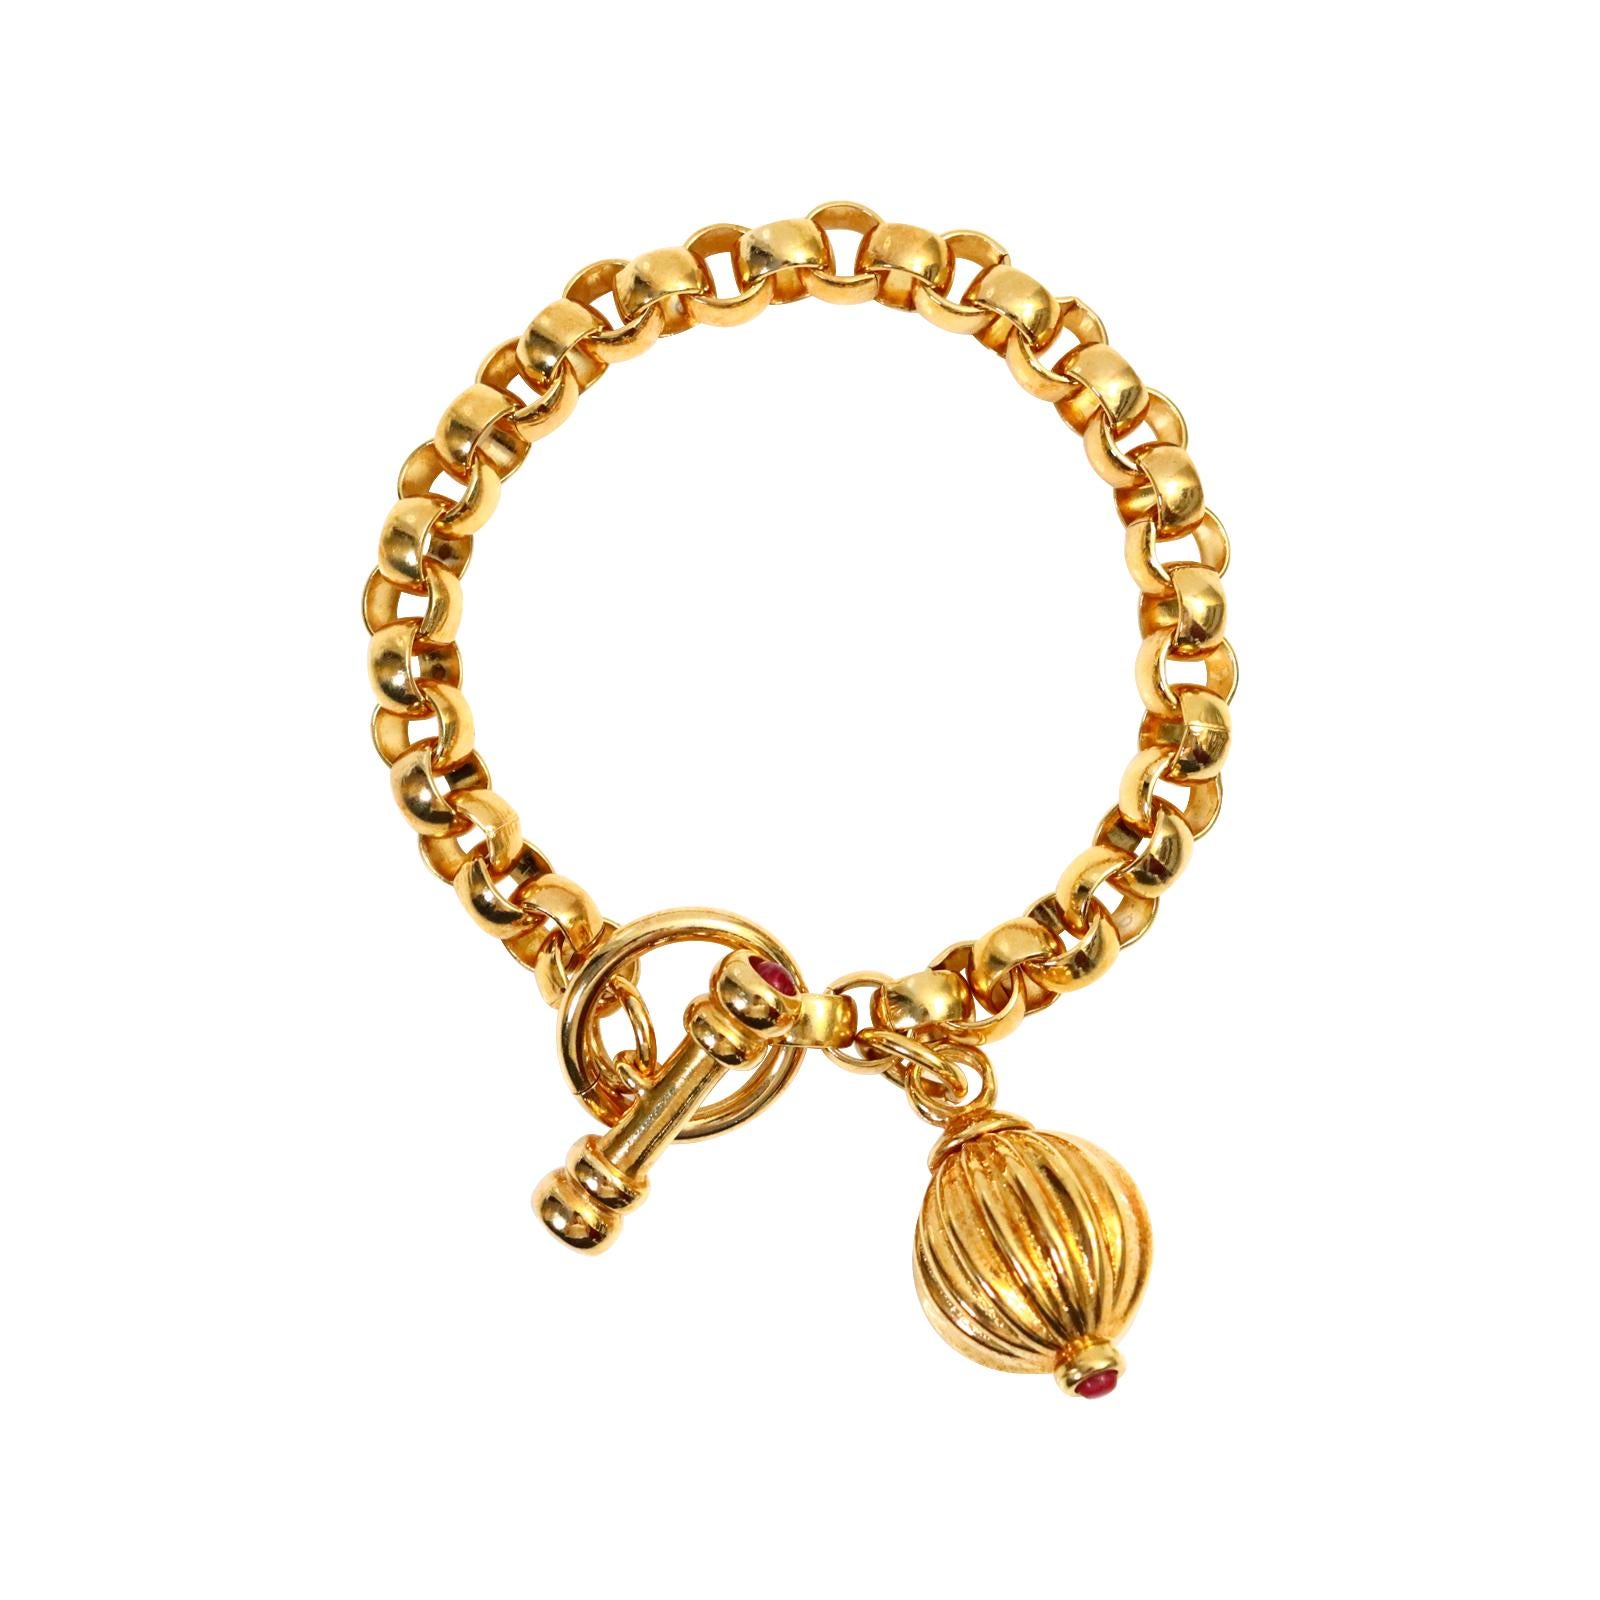 Contemporary Vintage Gold Tone Link Bracelet with Dangling Piece and Toggle Circa 1990s For Sale